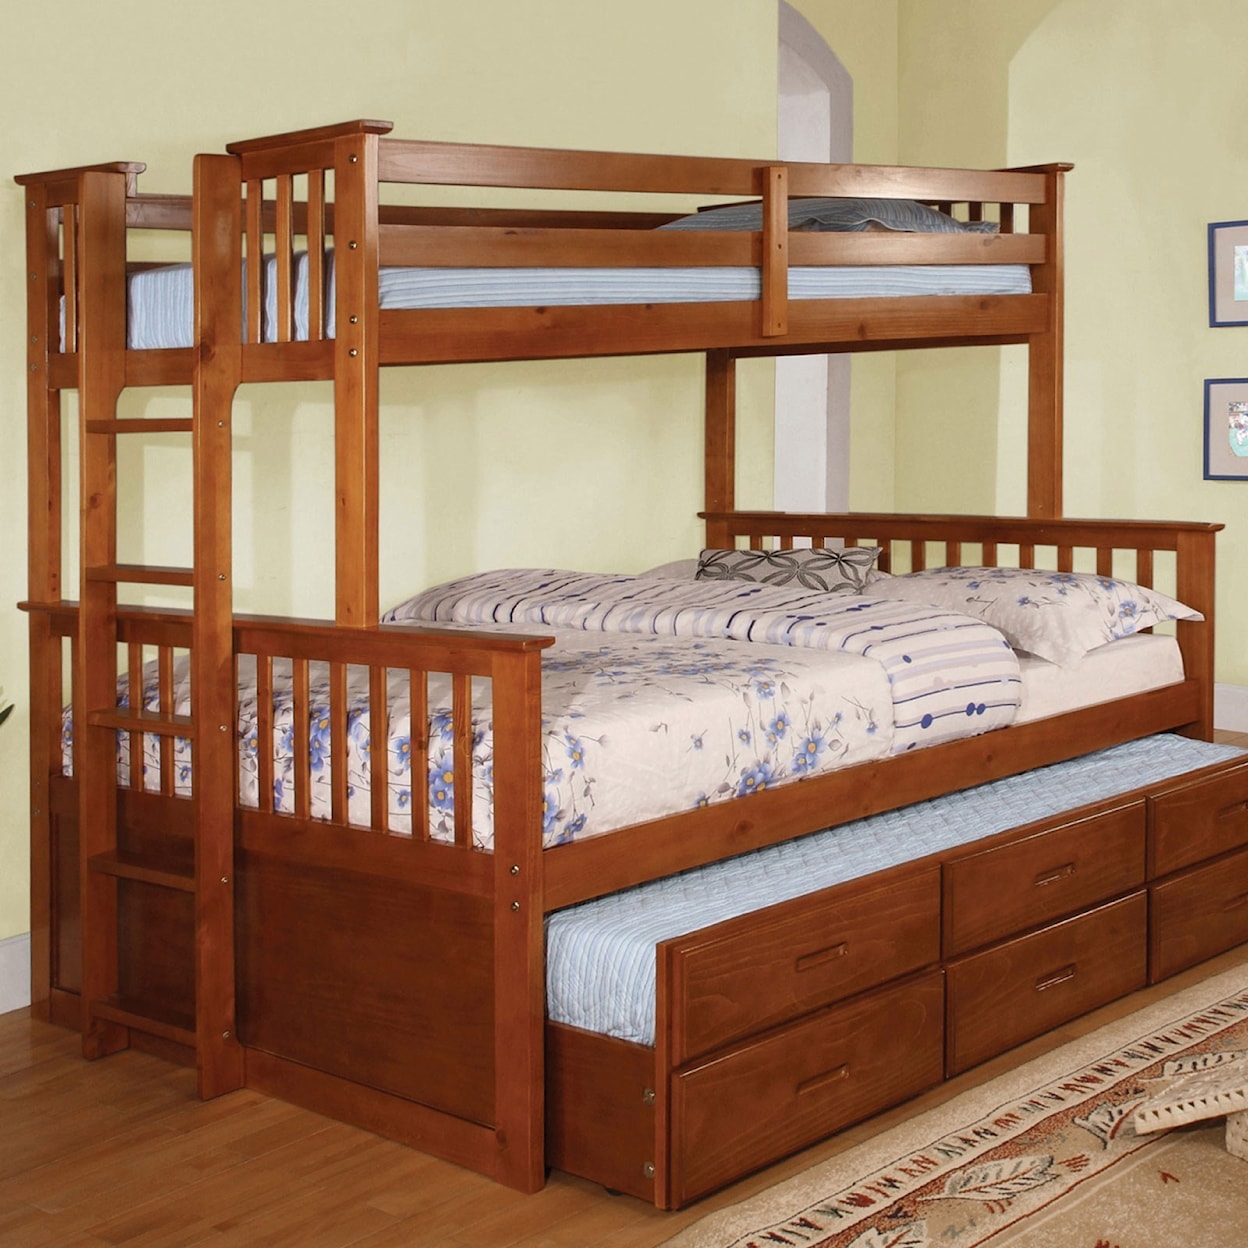 Furniture of America University Twin-over-Full Bunk Bed and Trundle